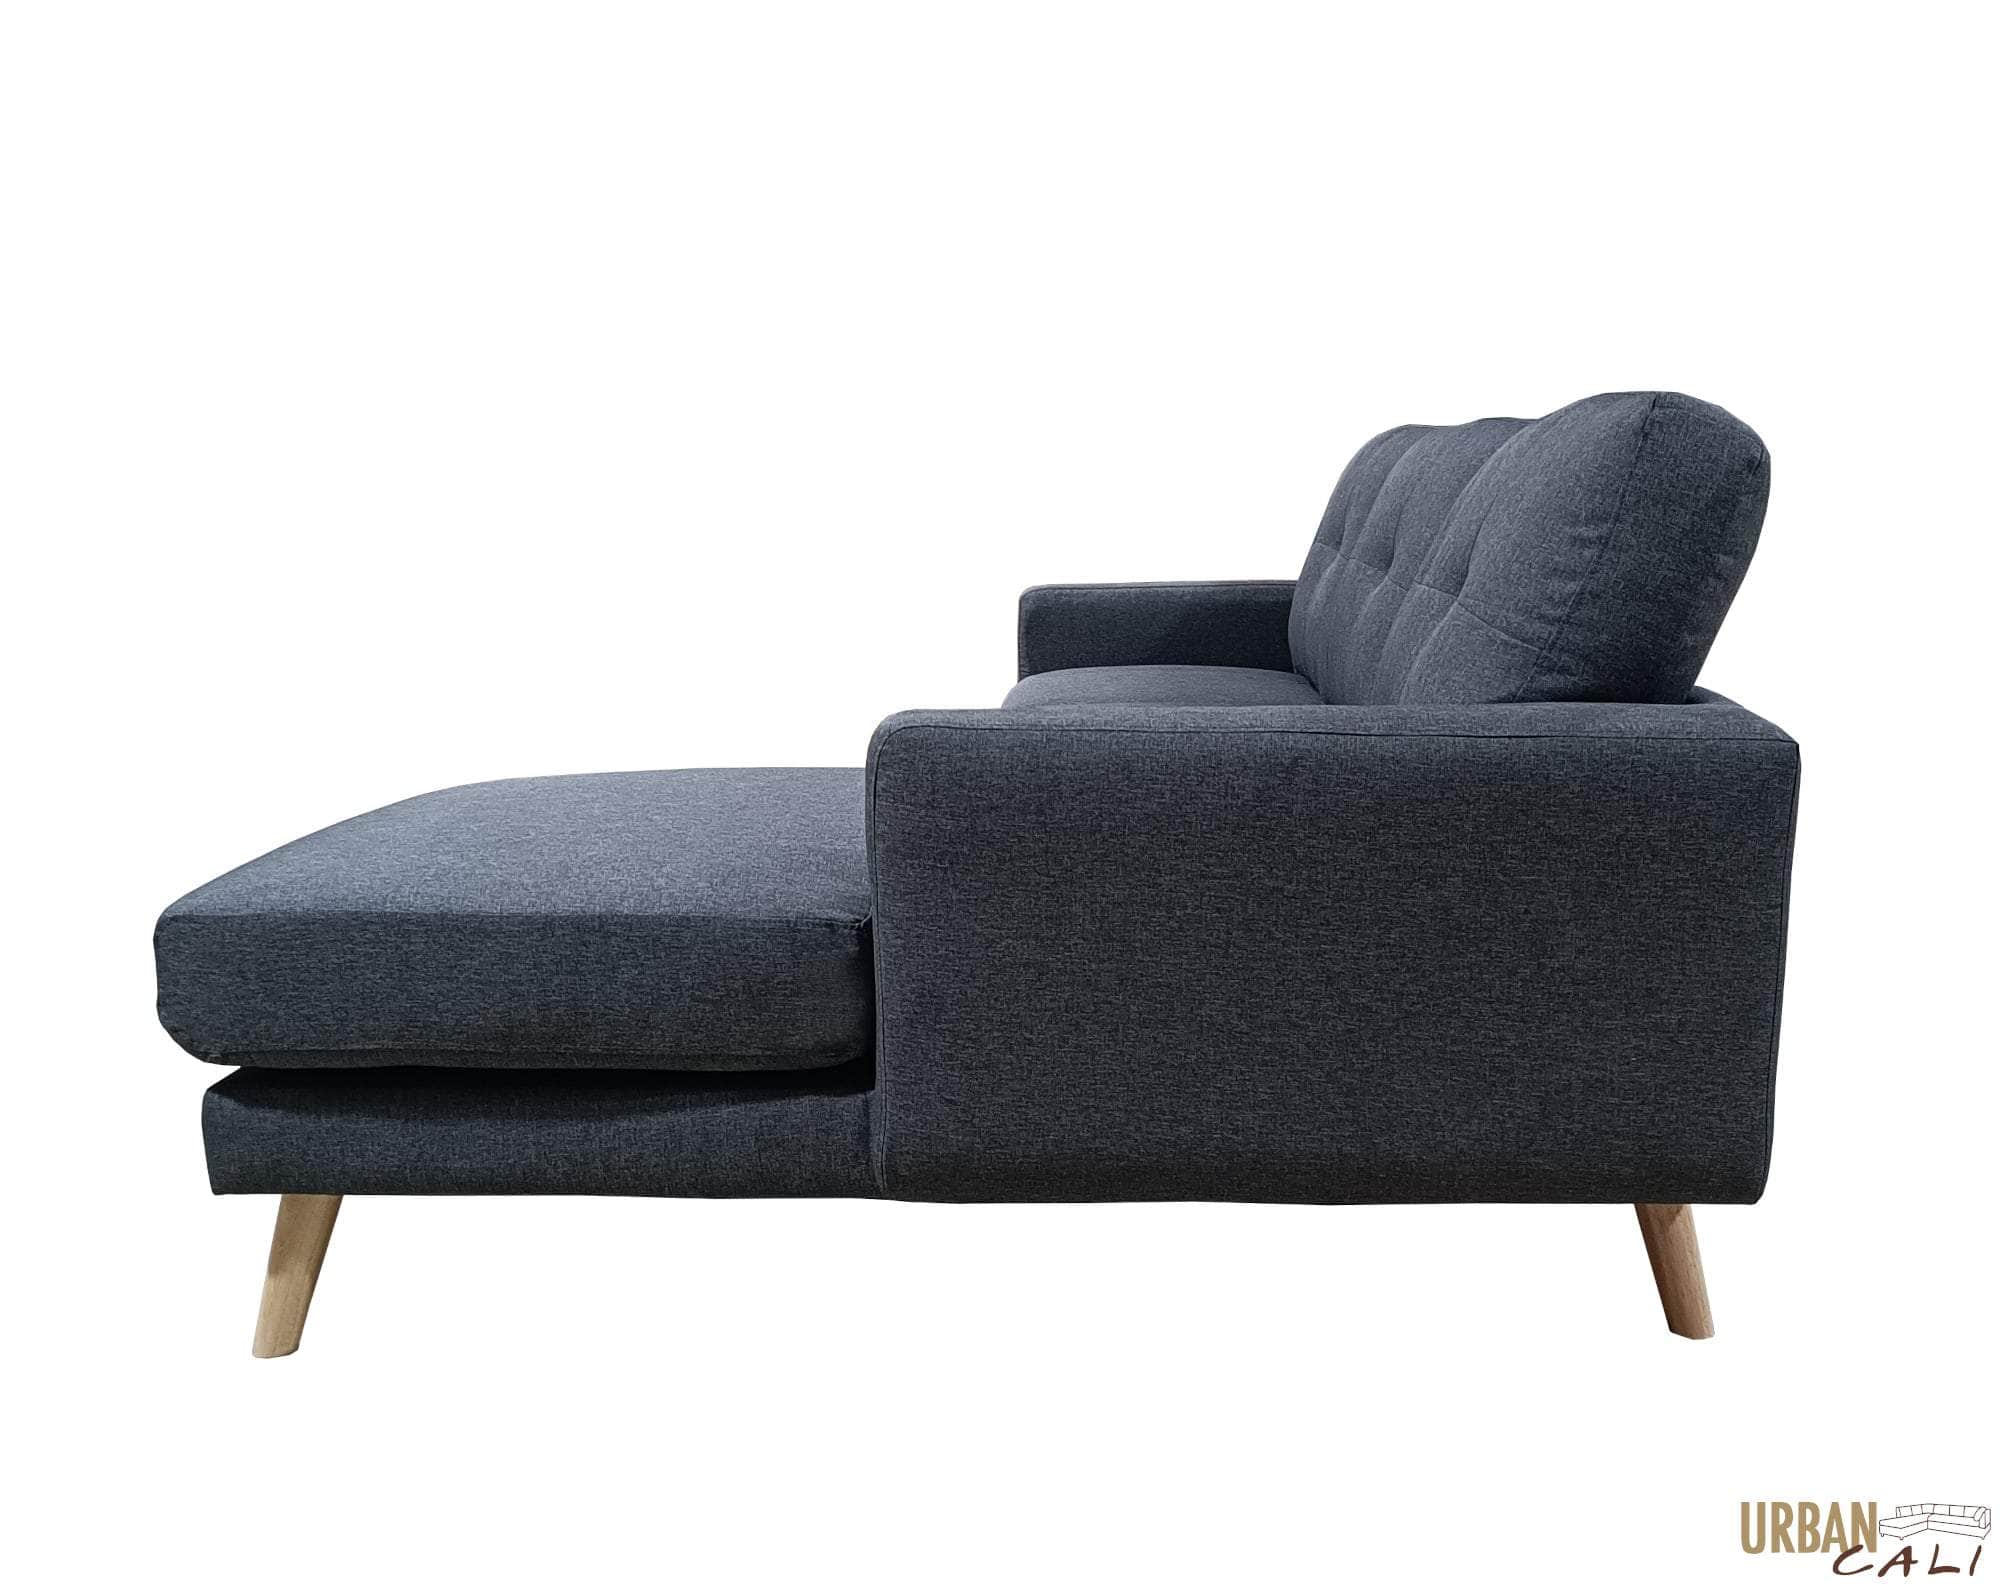 Pending - Urban Cali San Marino Tufted Sectional Sofa – Available in 2 Colours